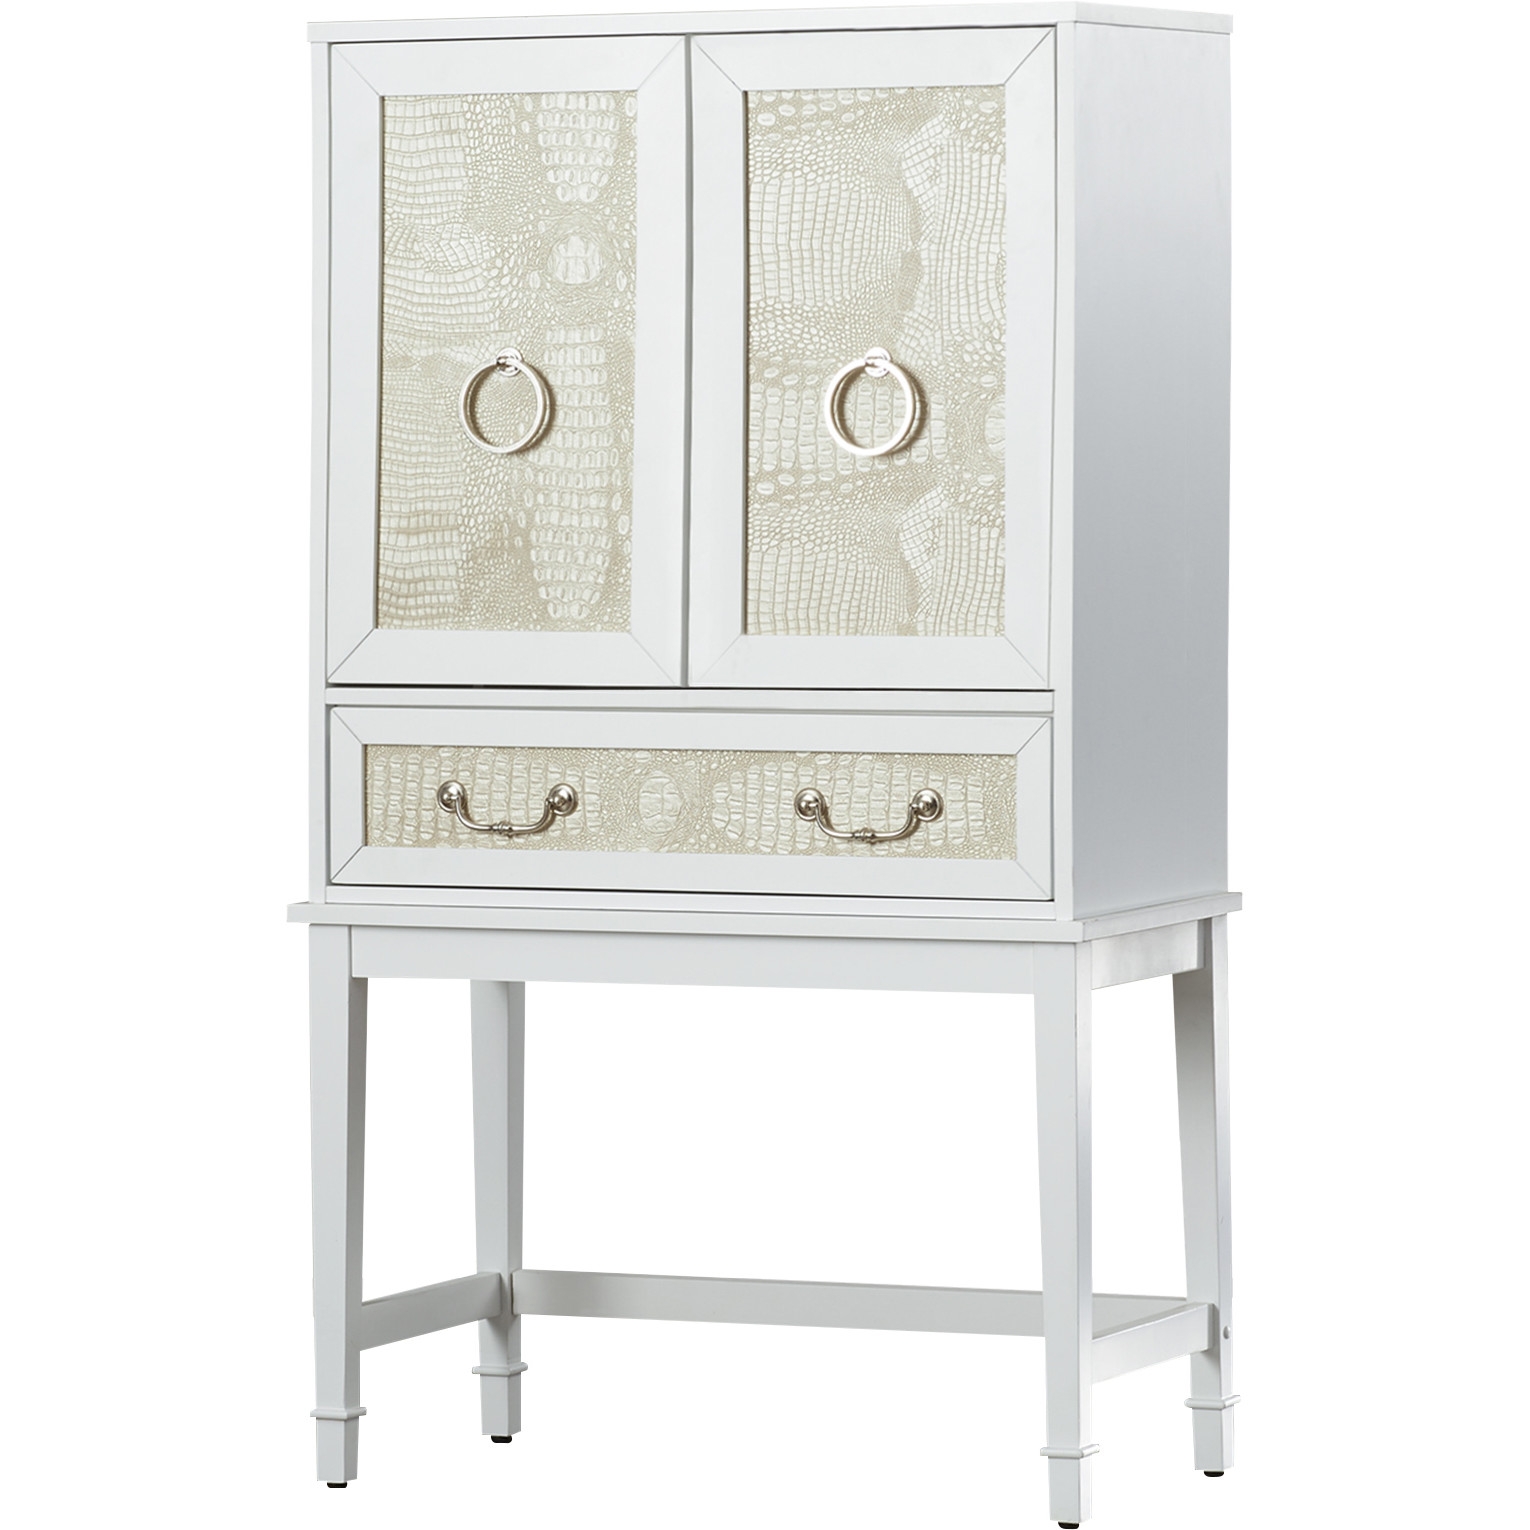 Newhaven Bar Cabinet with Wine Storage - Image 1